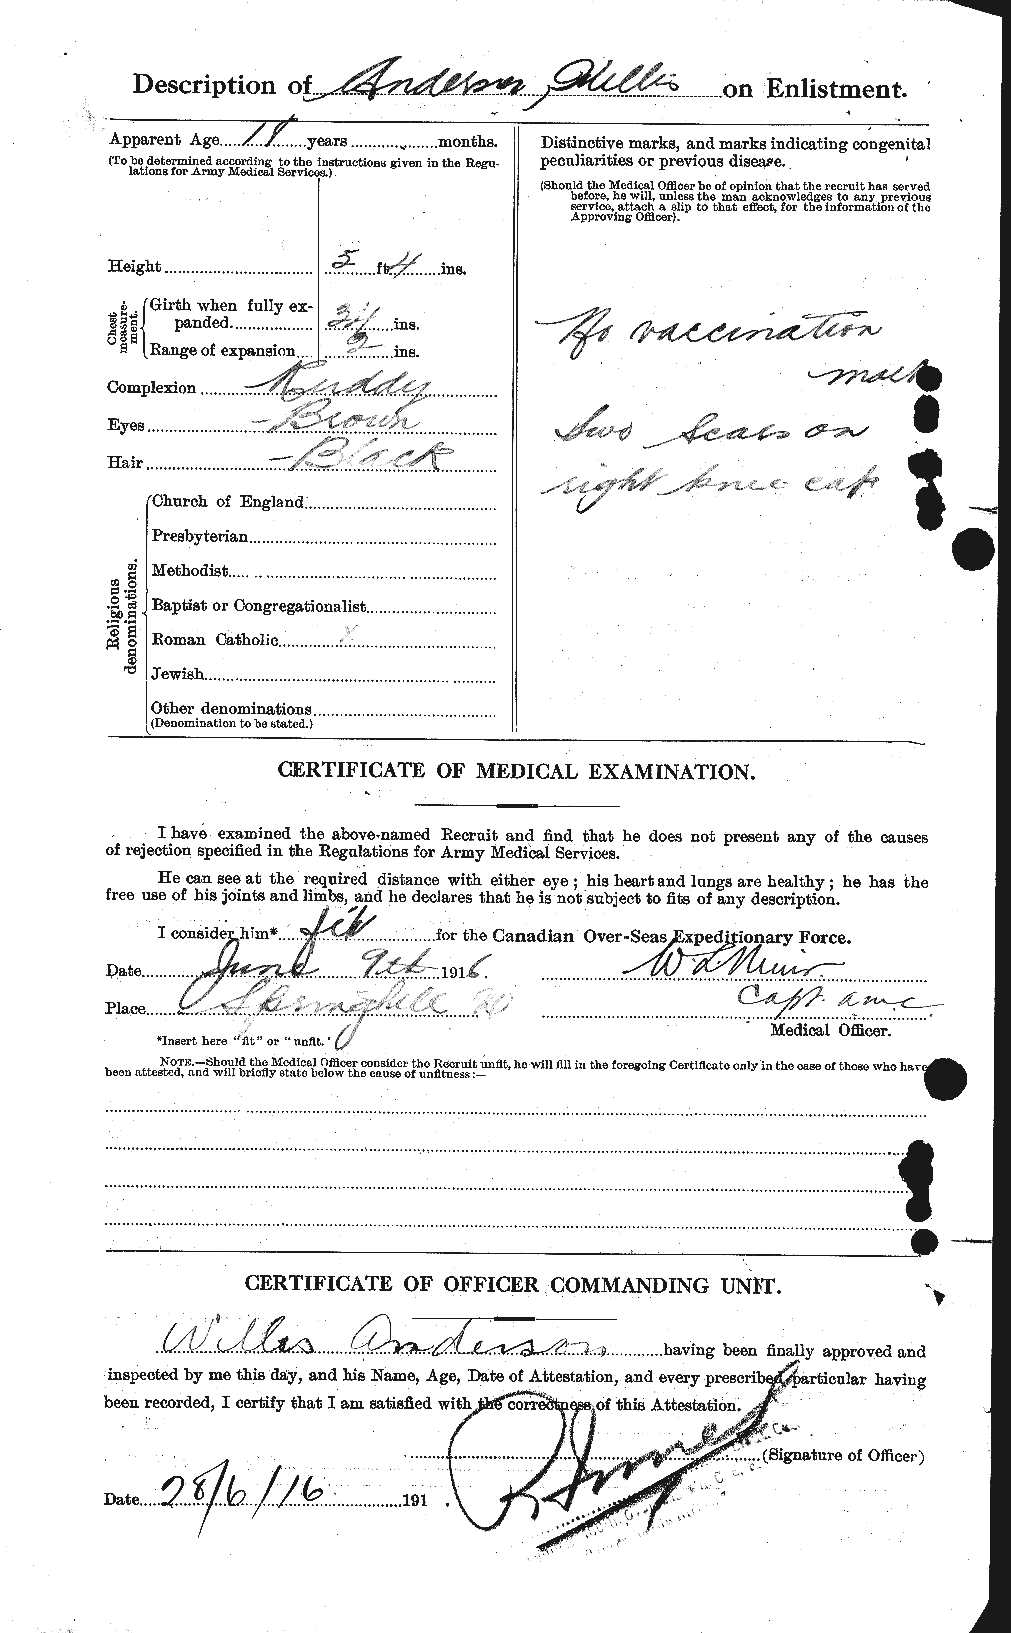 Personnel Records of the First World War - CEF 210665b